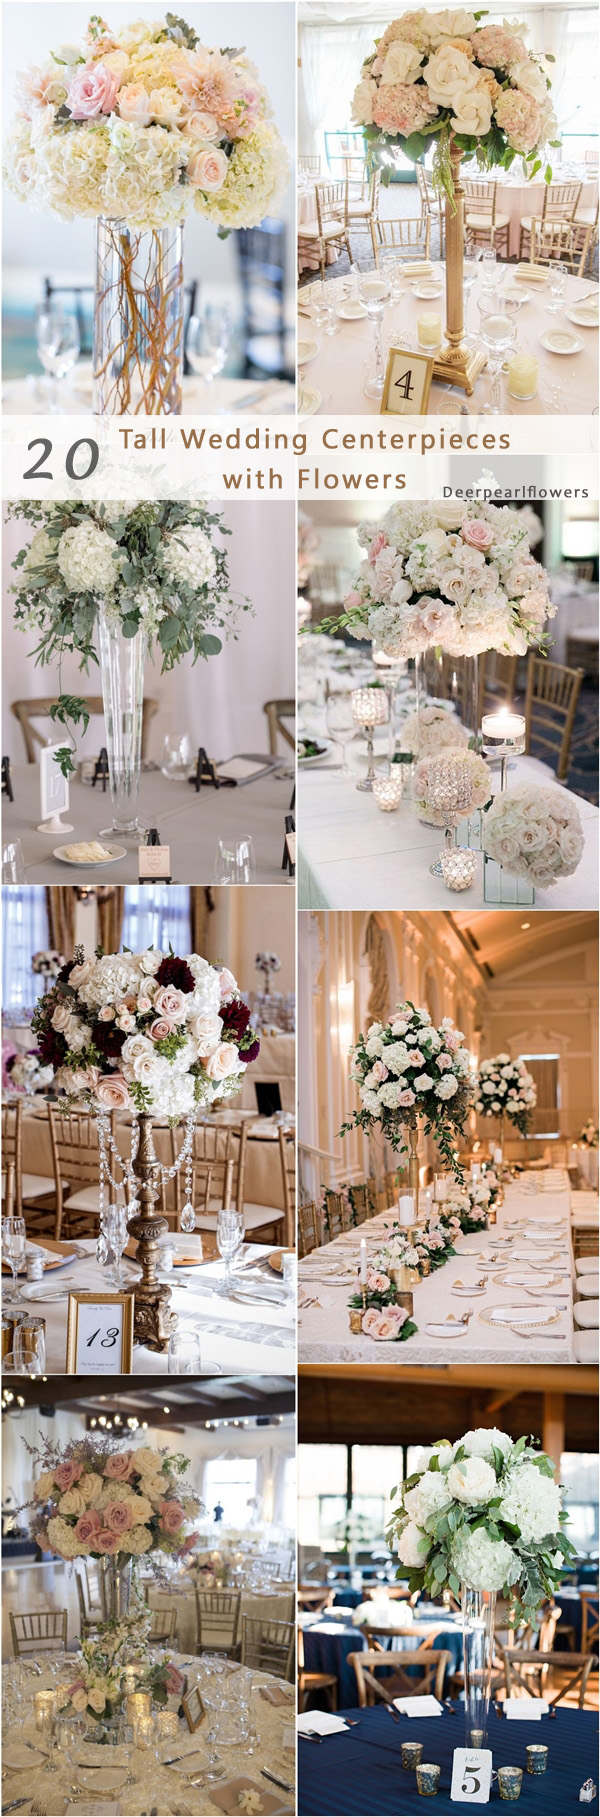 tall wedding centerpieces with flowers